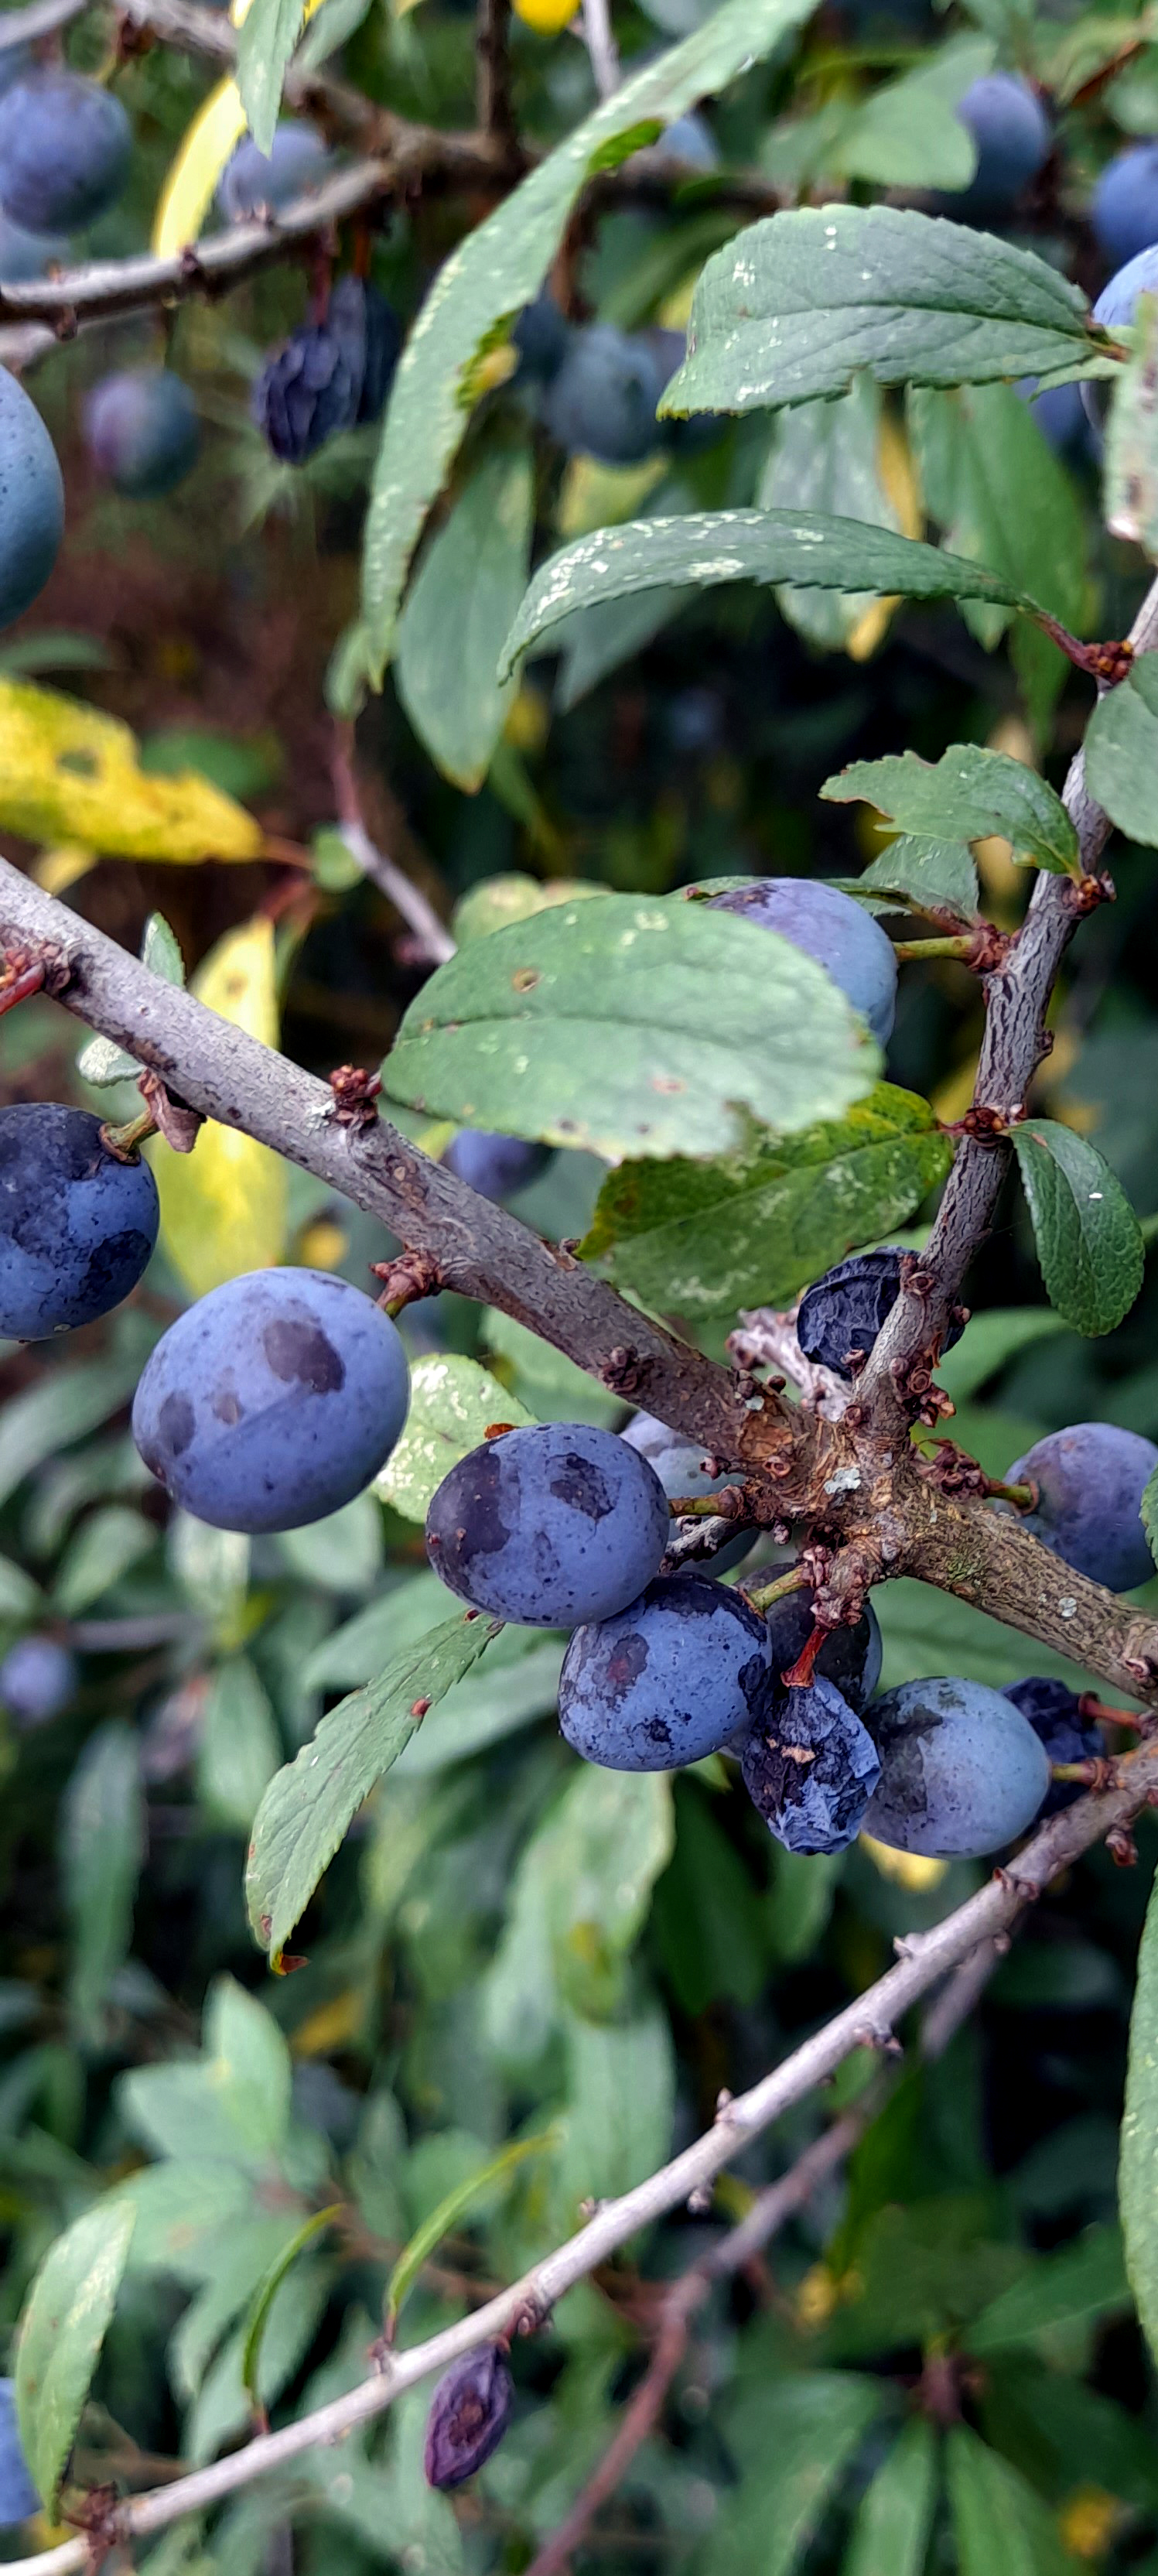 Sloes On Blackthorn, Golden Acre Park, 16th August 2022